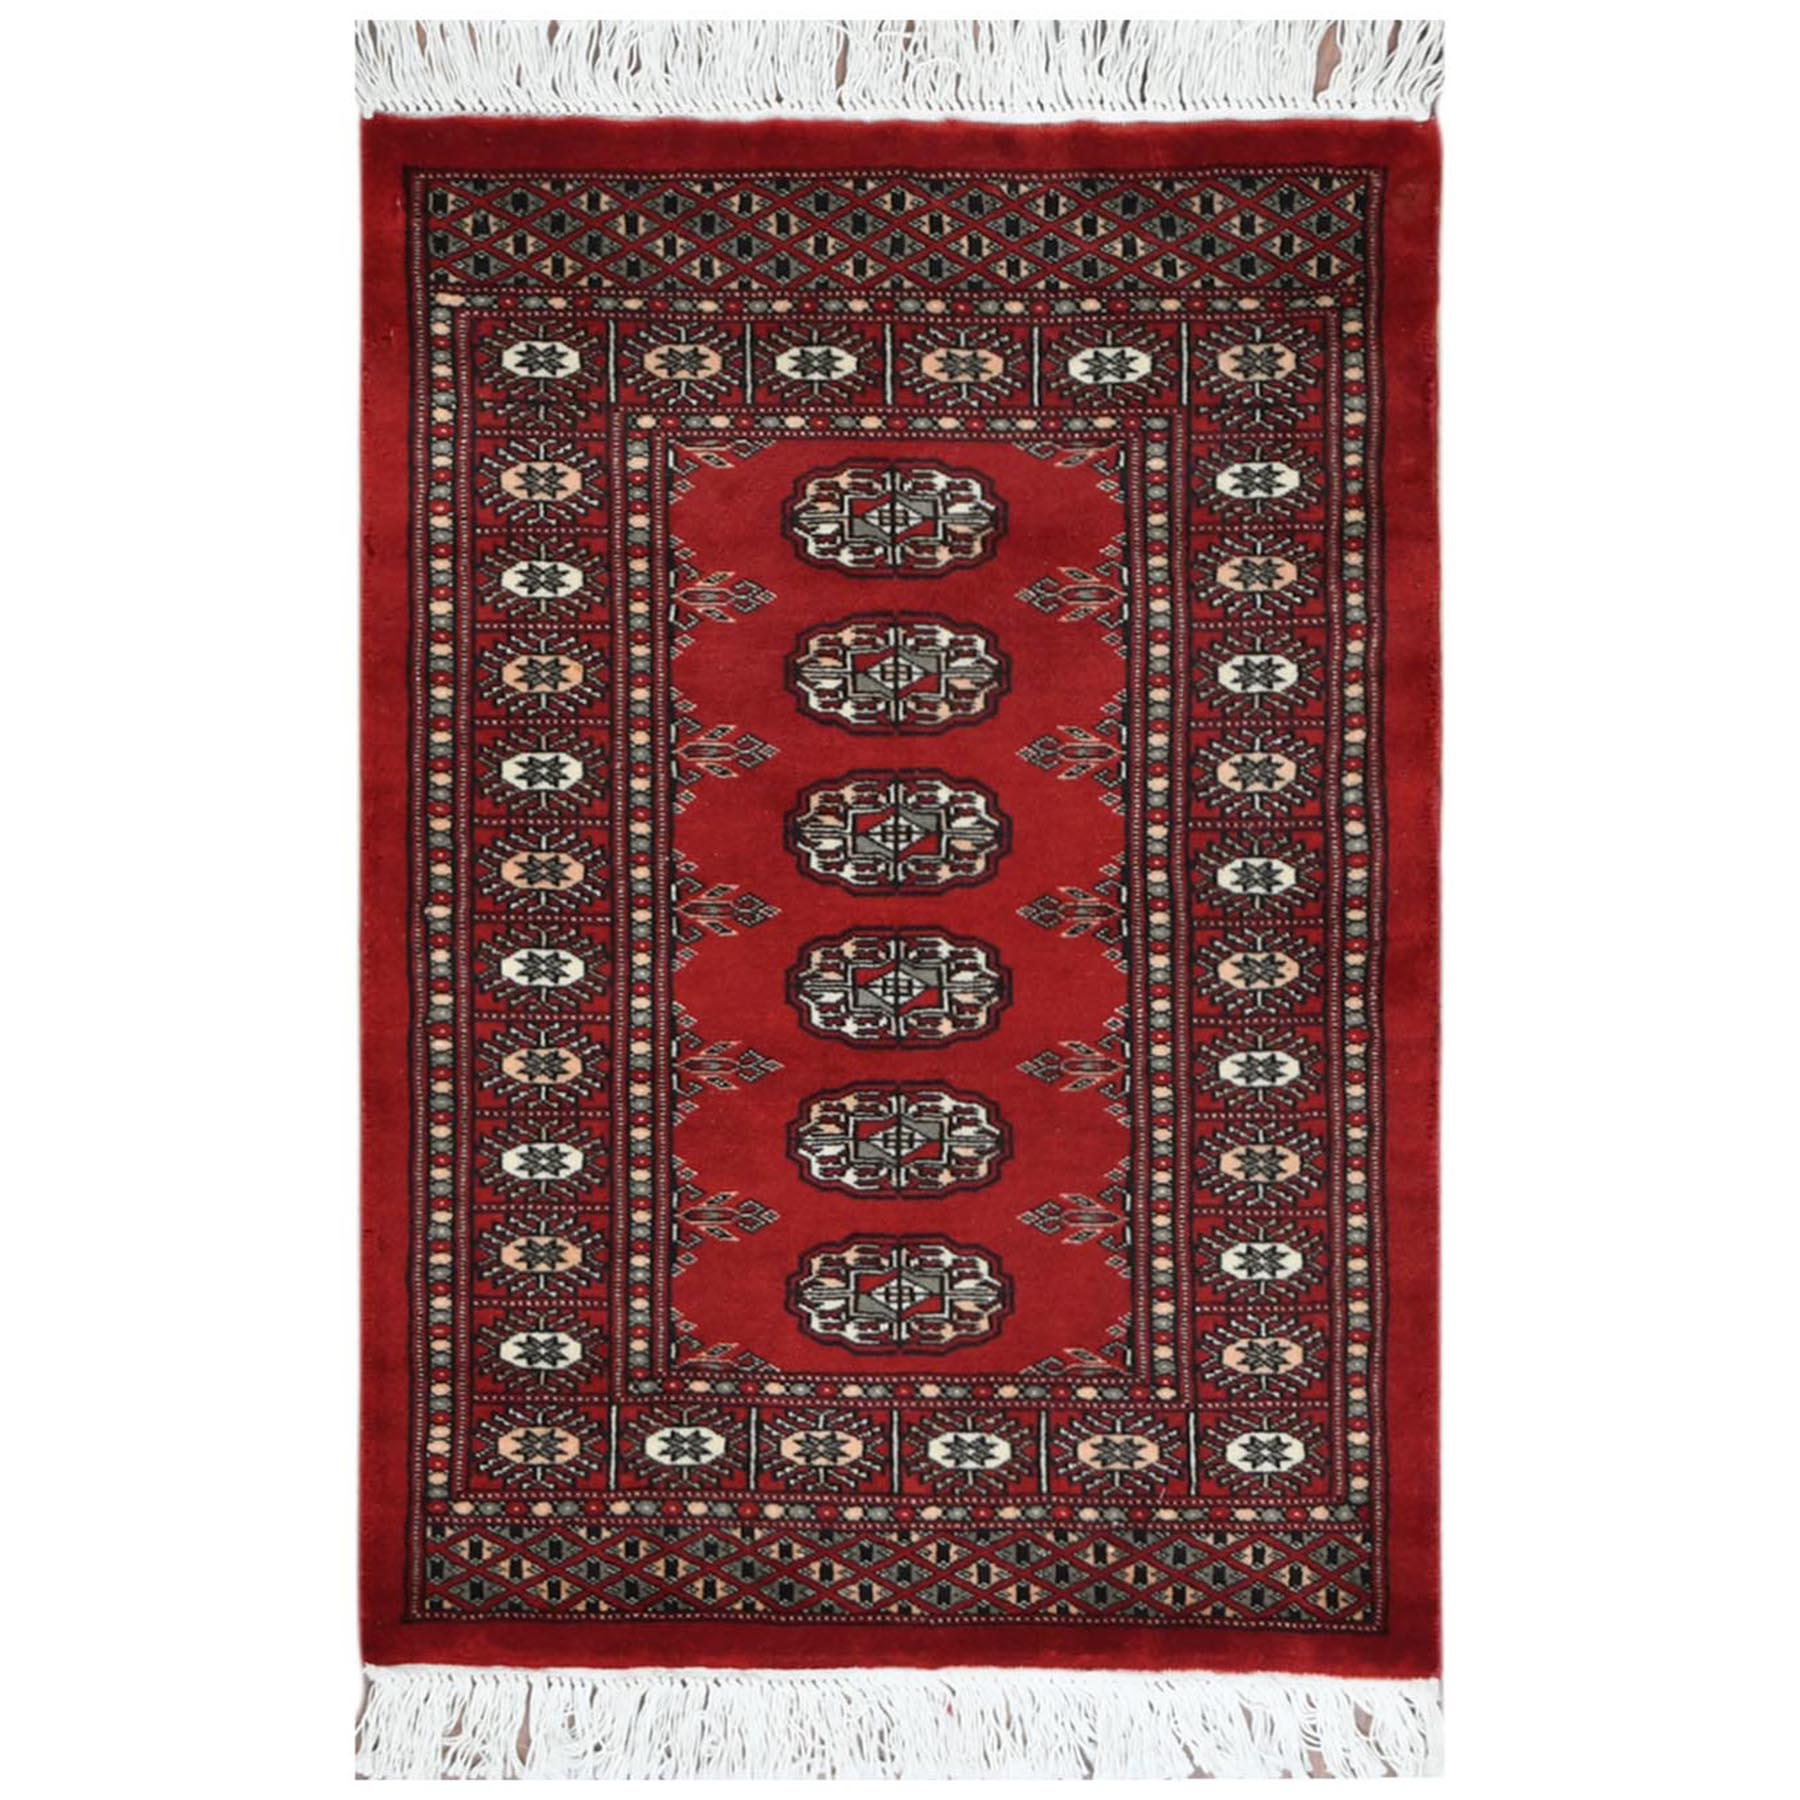 Nomadic And Village Collection Hand Knotted Red Rug No: 1122746